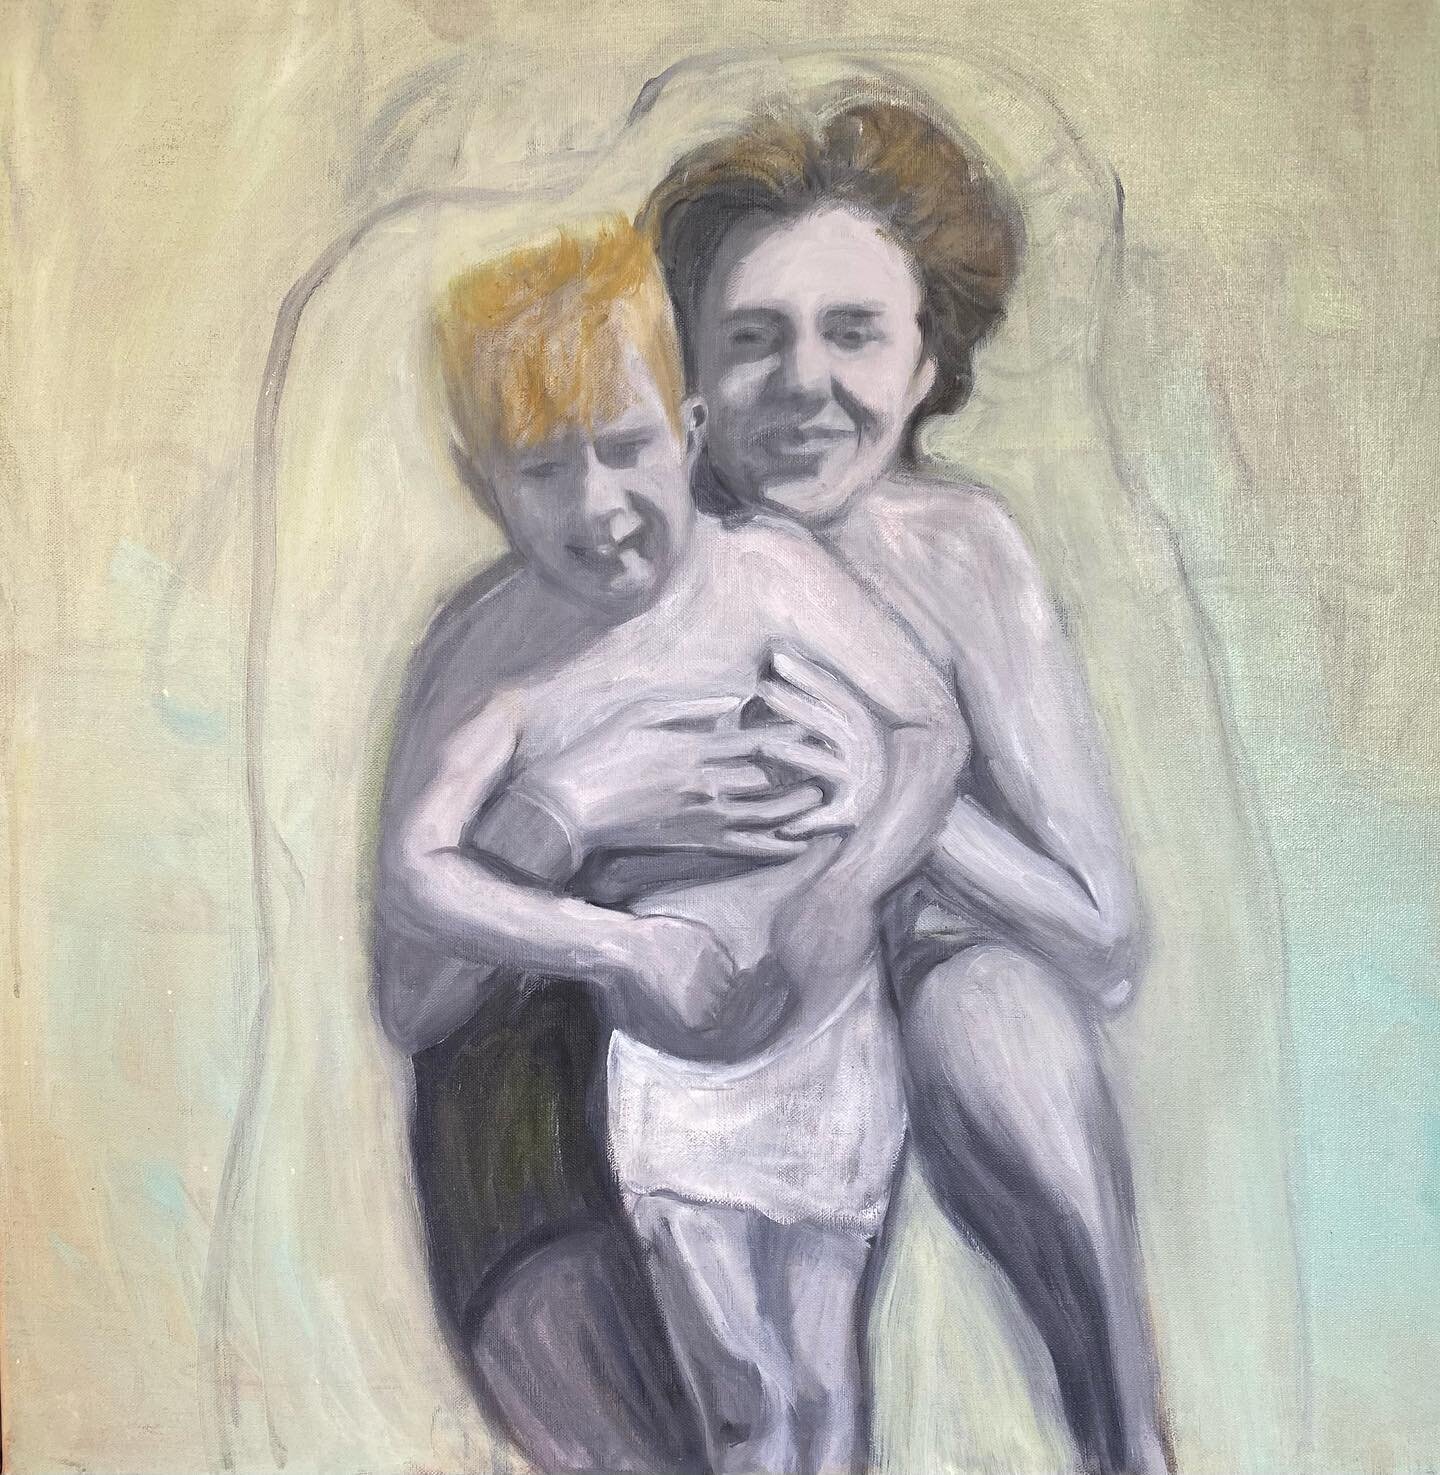 &lsquo;Holding On&rsquo; 2021. Universally, a mother and son, specifically from an old photo of husband Mike and his mother, Joan.

#dpatriciahay #artistsupportpledgeuk #paintpaintpaint #artists_insta #artistsoninsta #paintingoncanvas #canadianpainte